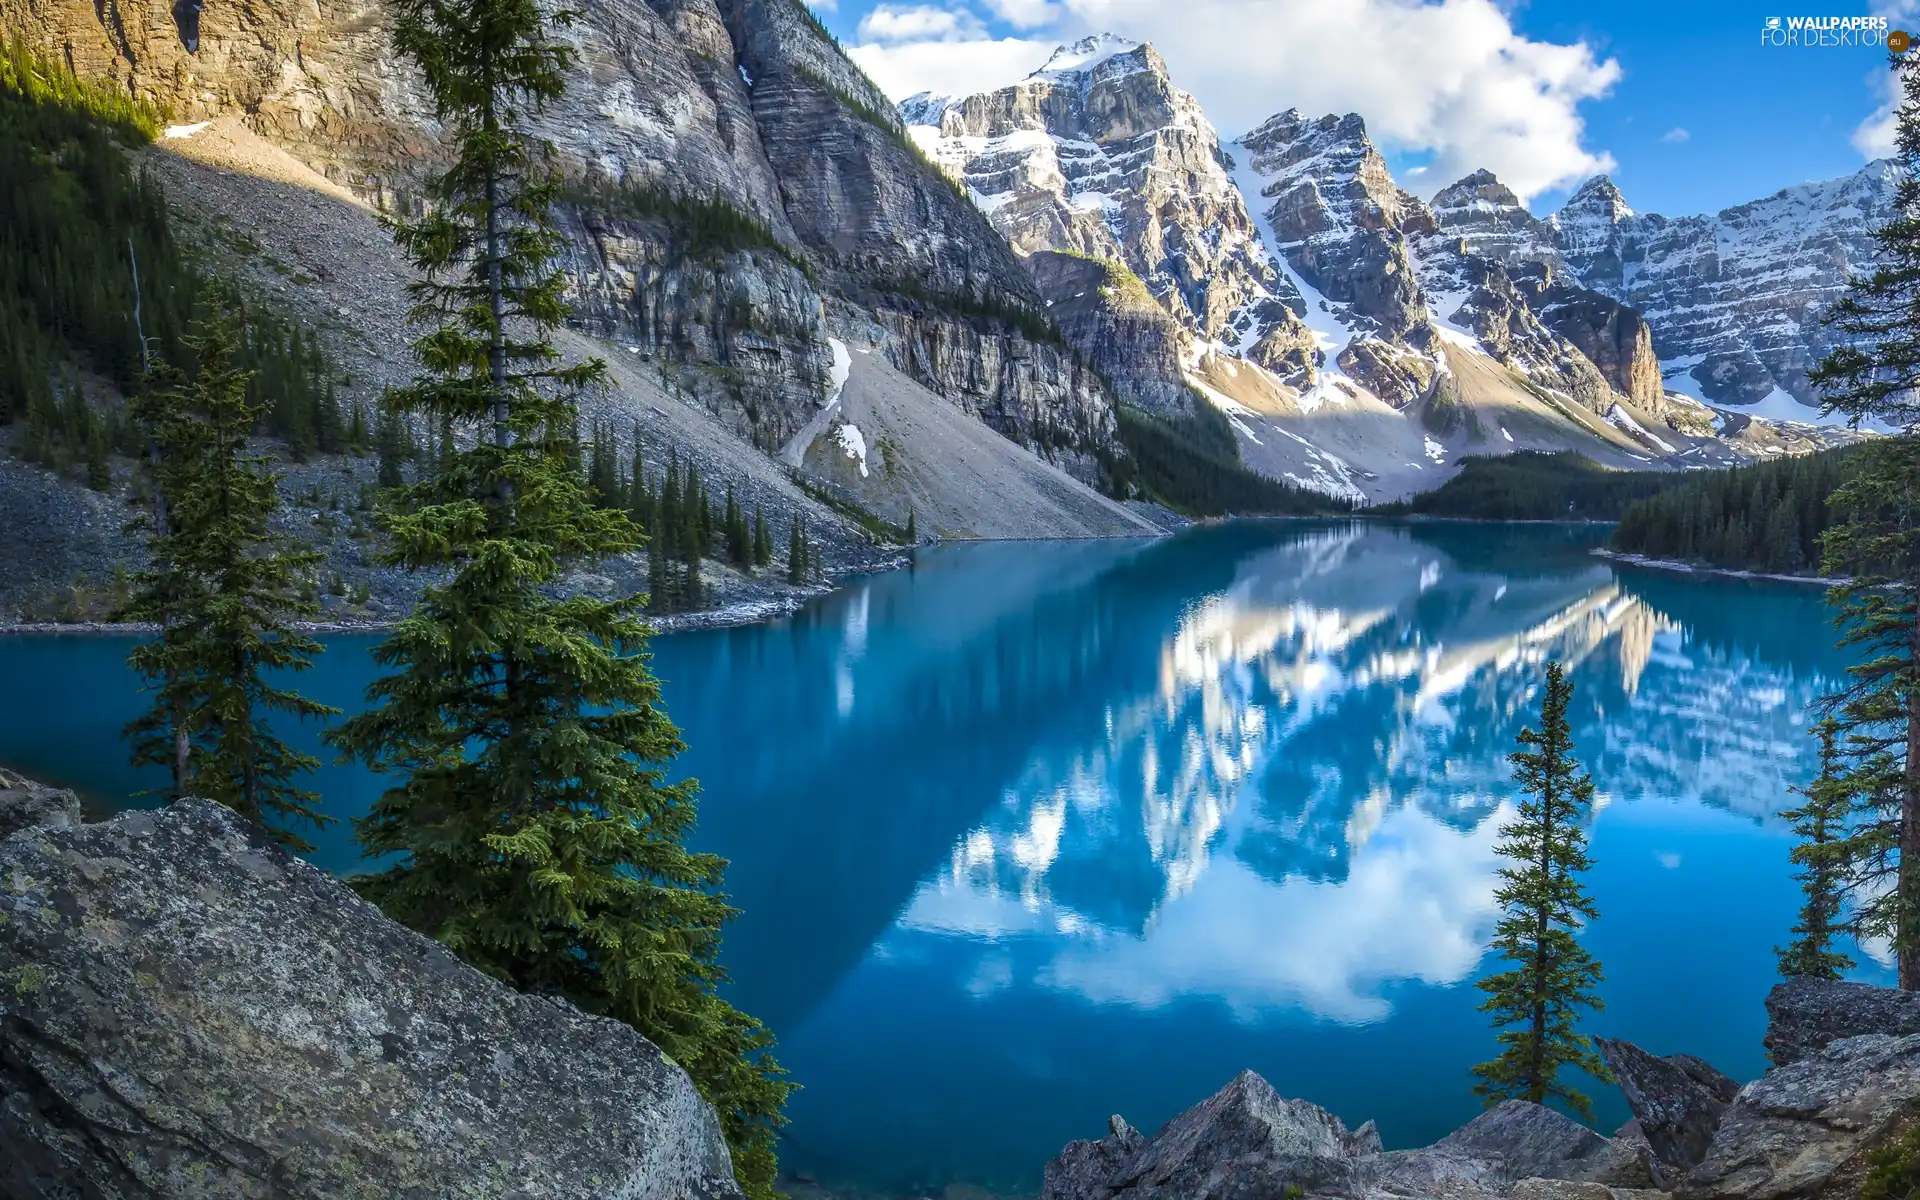 Mountains, Canada, Moraine Lake, lake, trees, reflection, clouds, Banff National Park, Alberta, viewes, forest